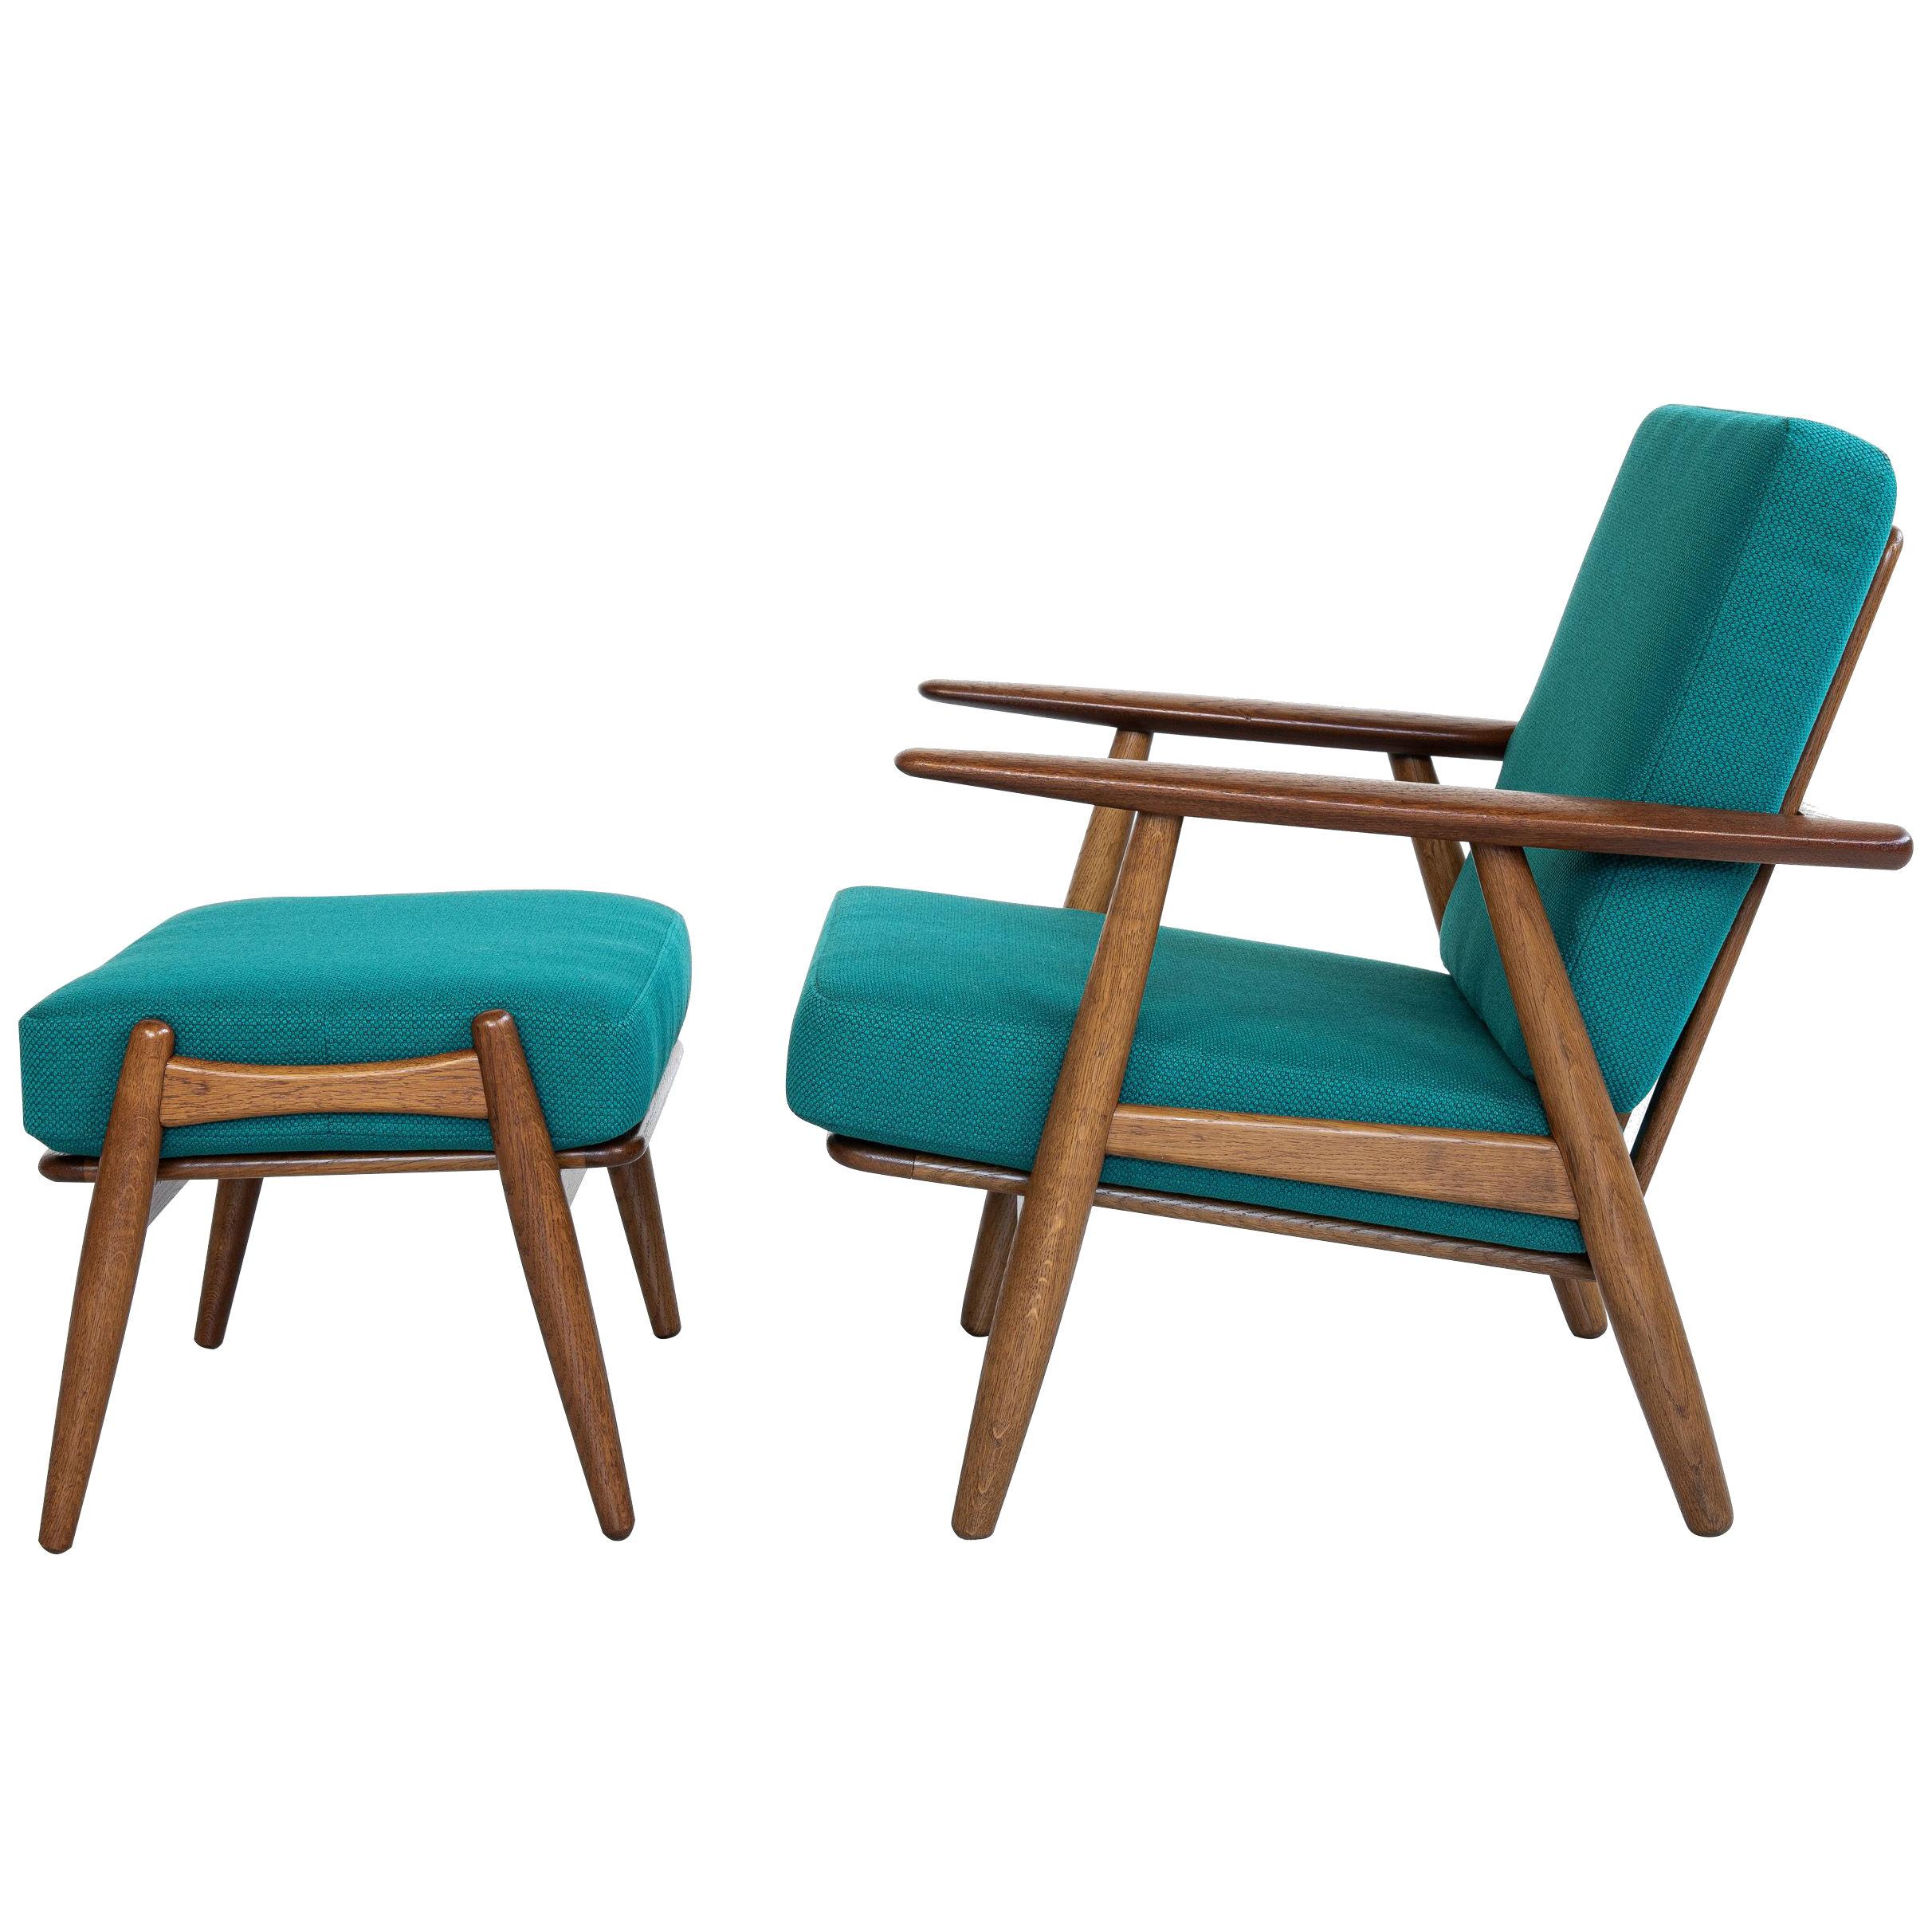 Midcentury Cigar Chair and Ottoman by Hans Wegner for Getama 1950s